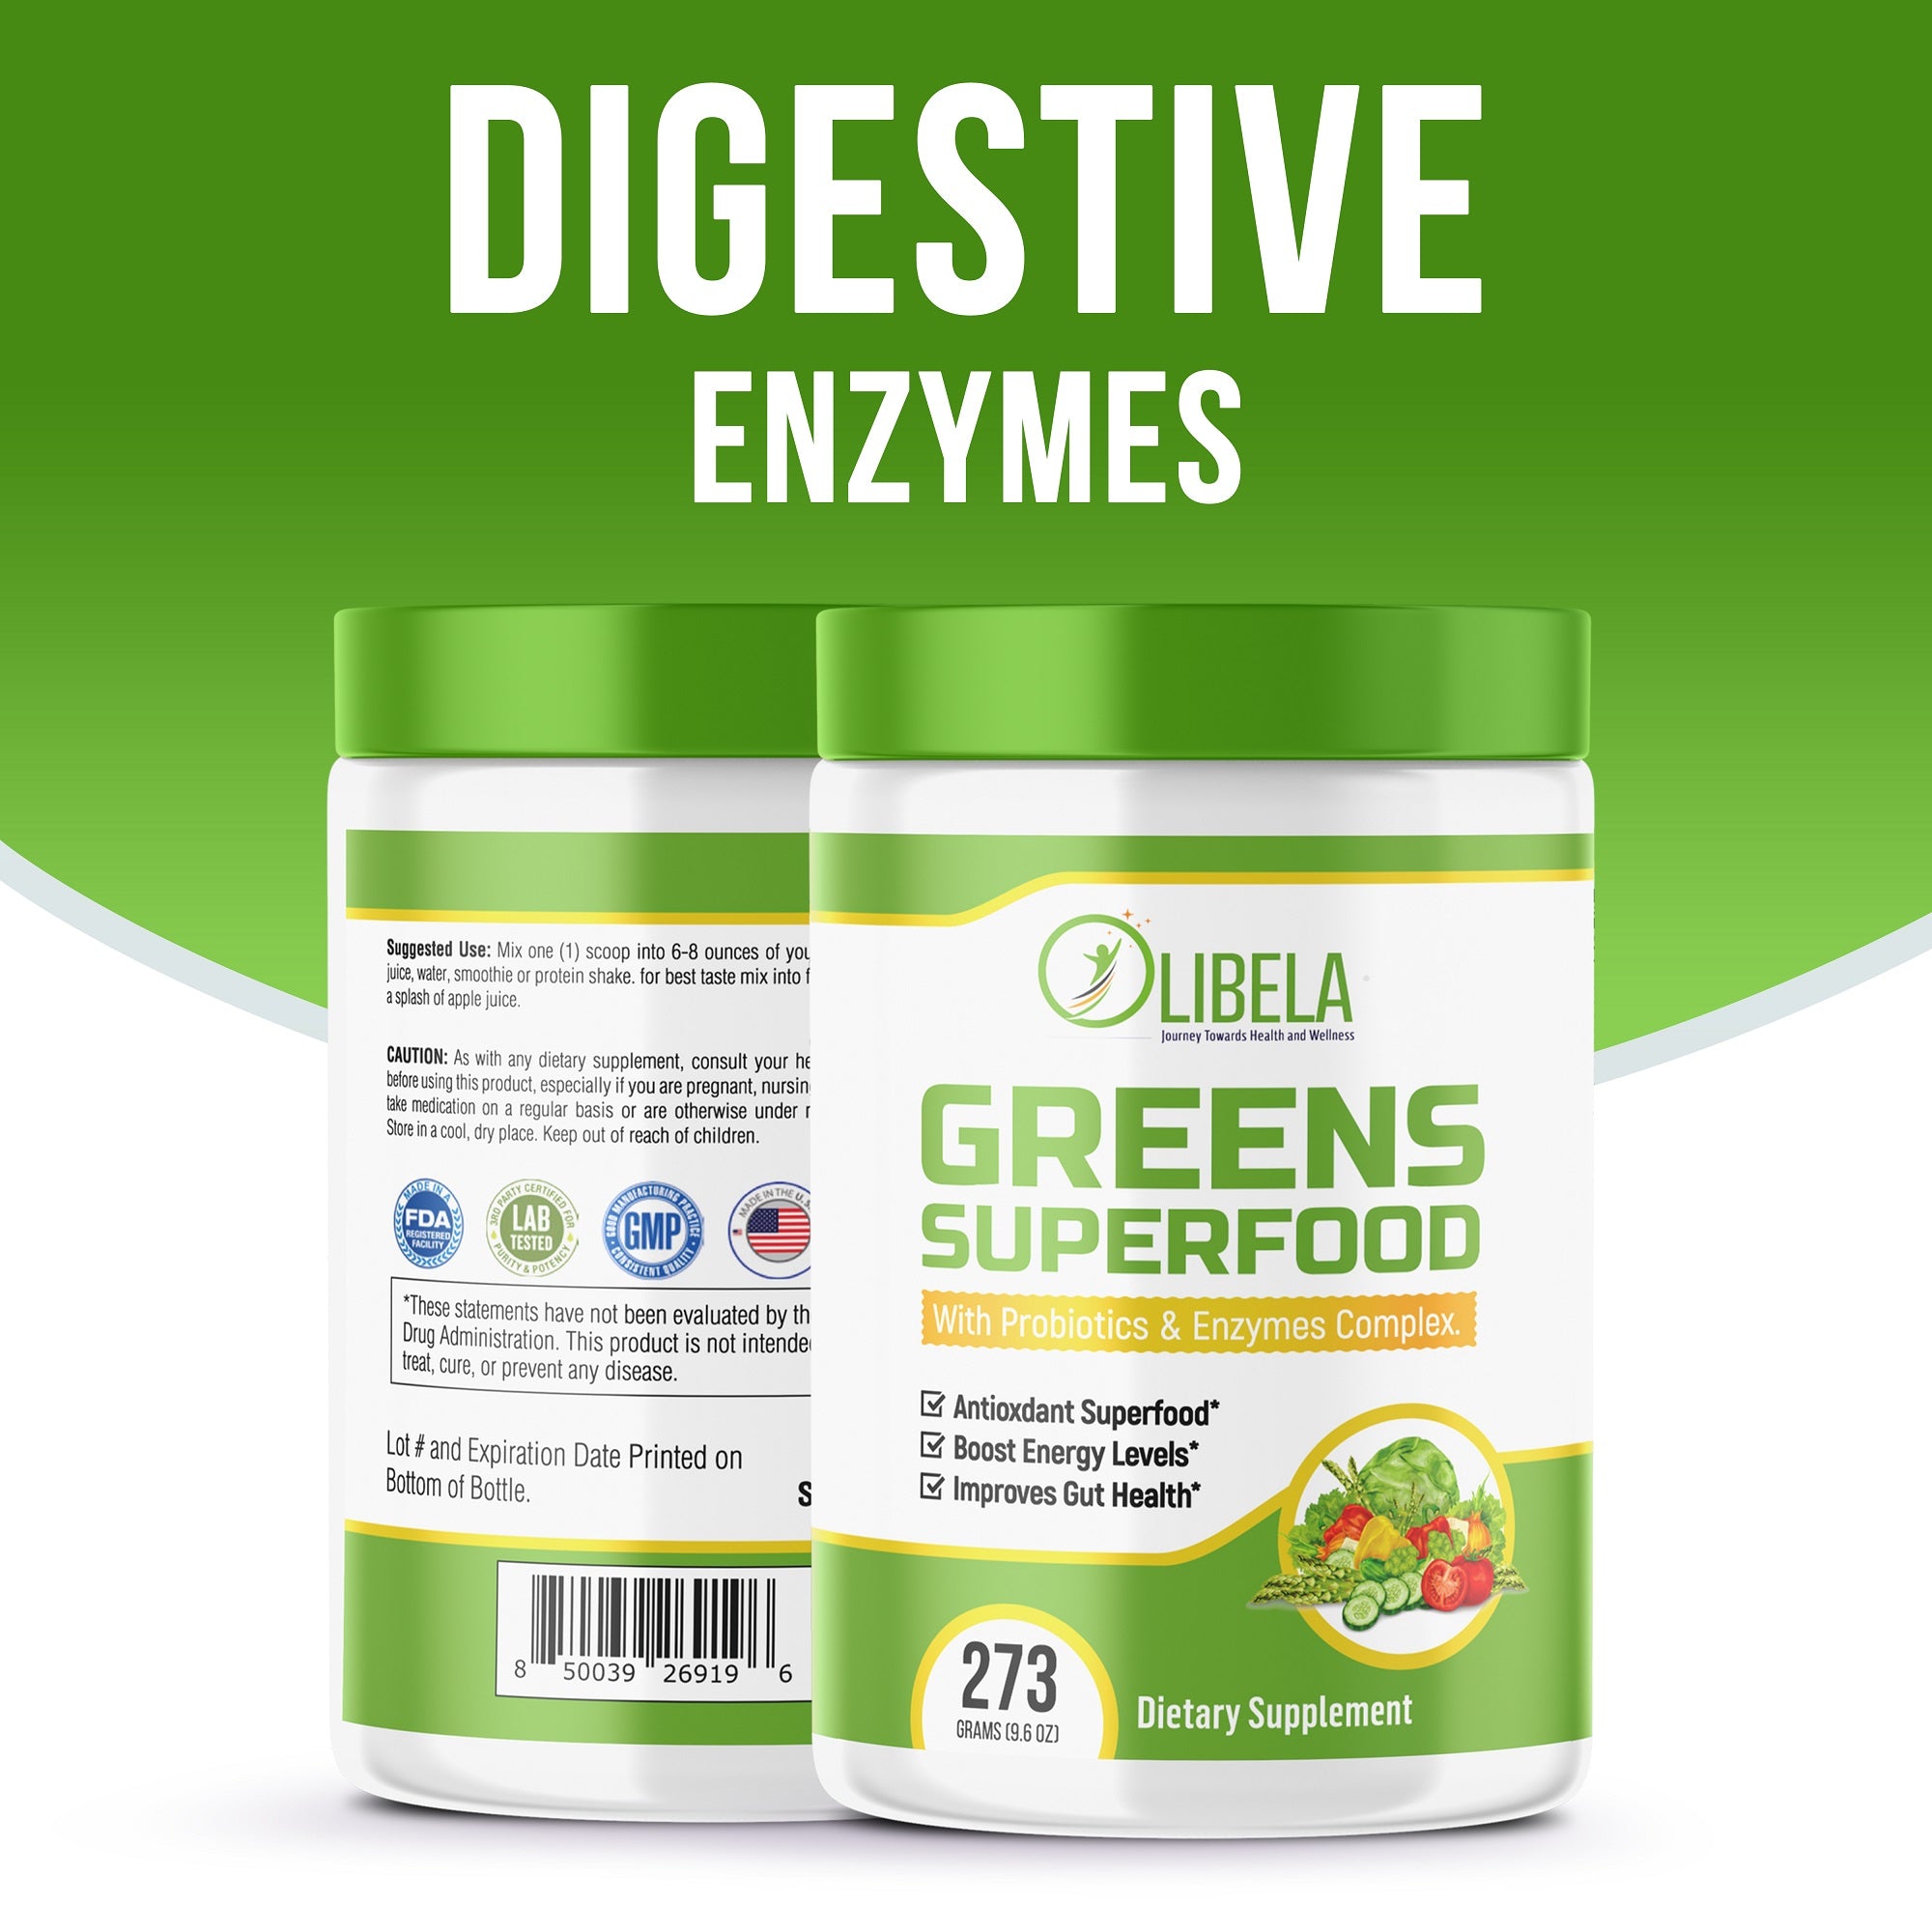 Greens Powder Superfood - With Probiotics And Prebiotics, Digestive Enzyme Complex, Beet Root Powder, Original Antioxidants, and Organic Greens. Boost Energy Levels And Improve Gut Health, 9.6oz (273g)